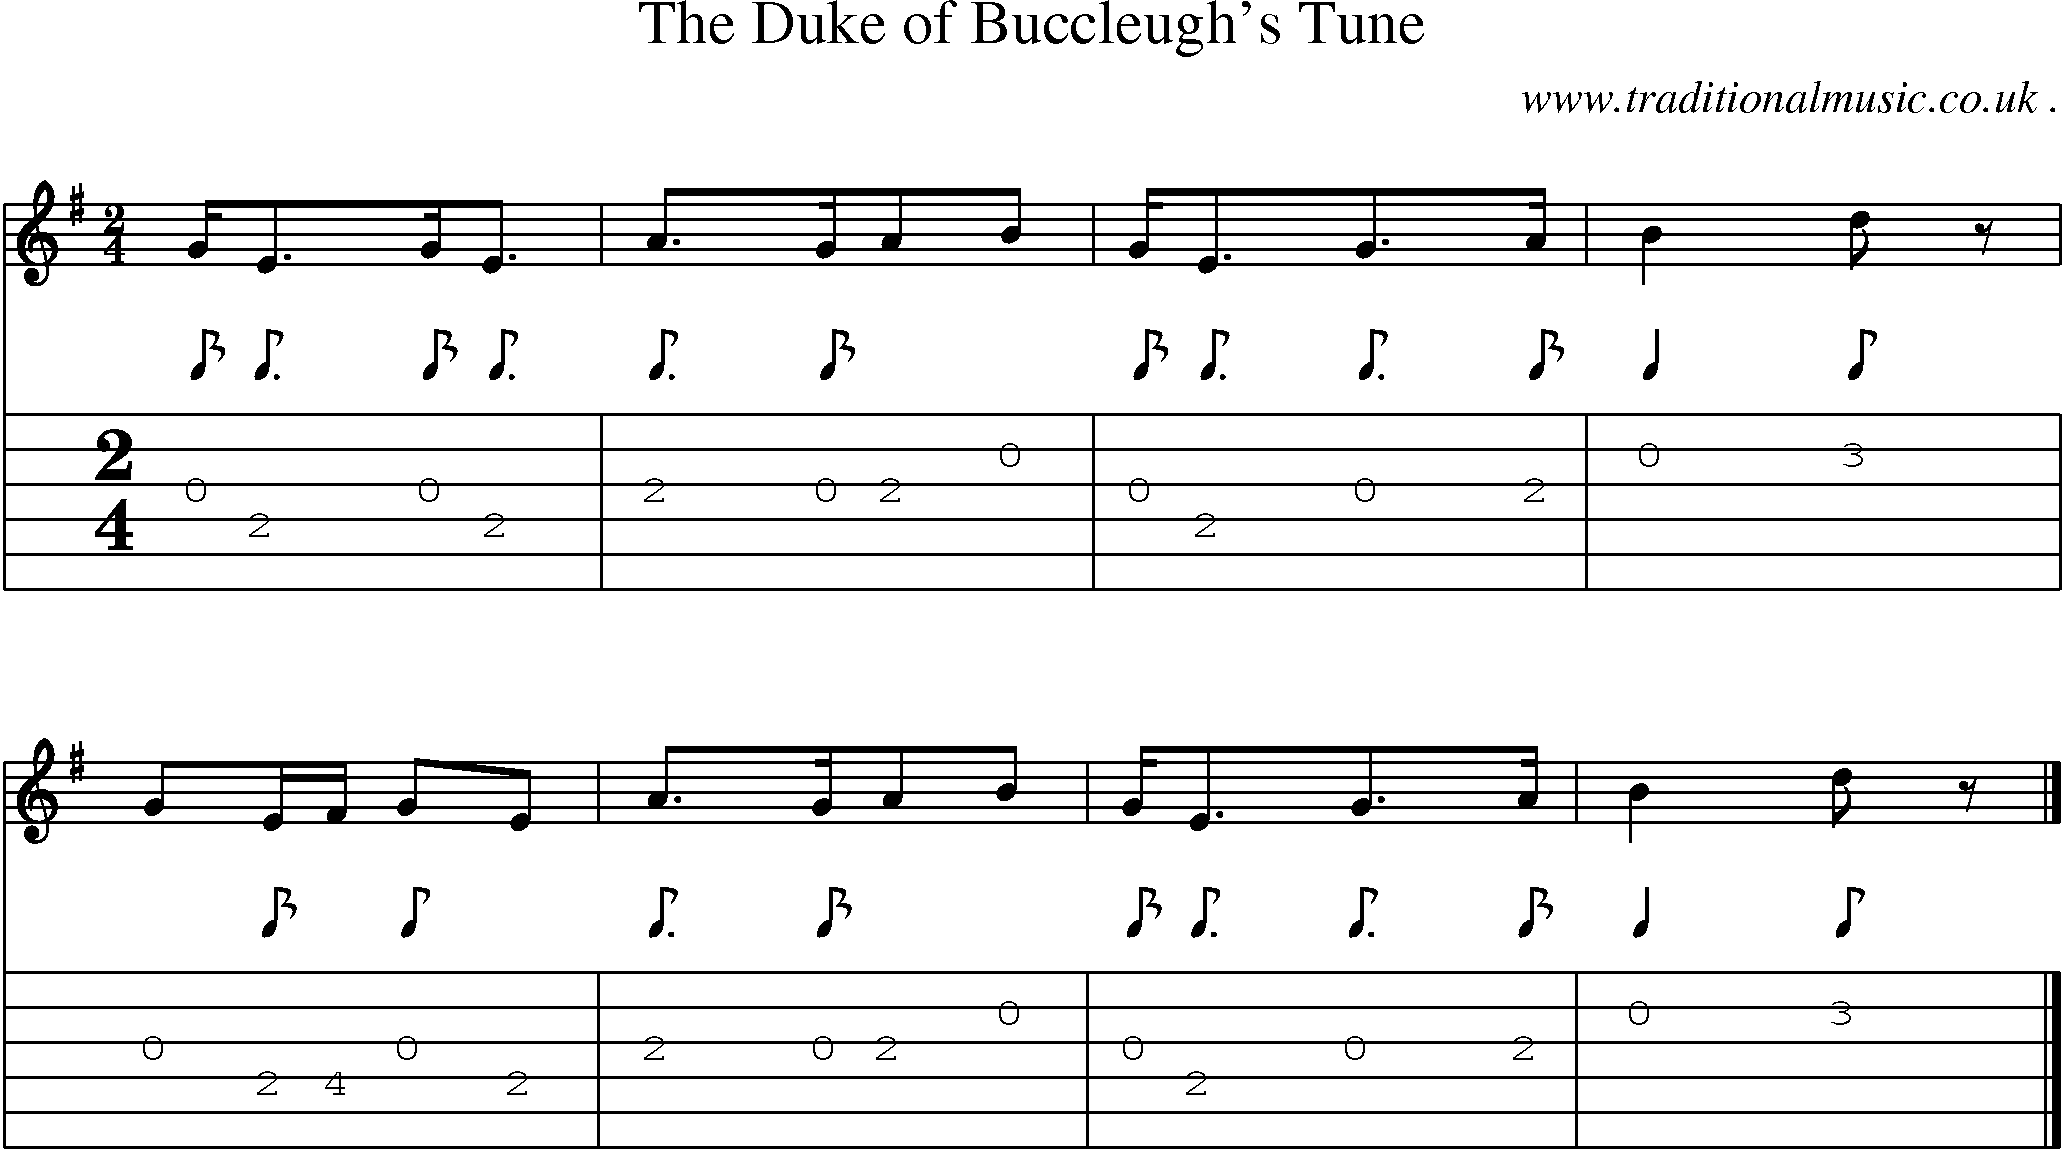 Sheet-music  score, Chords and Guitar Tabs for The Duke Of Buccleughs Tune